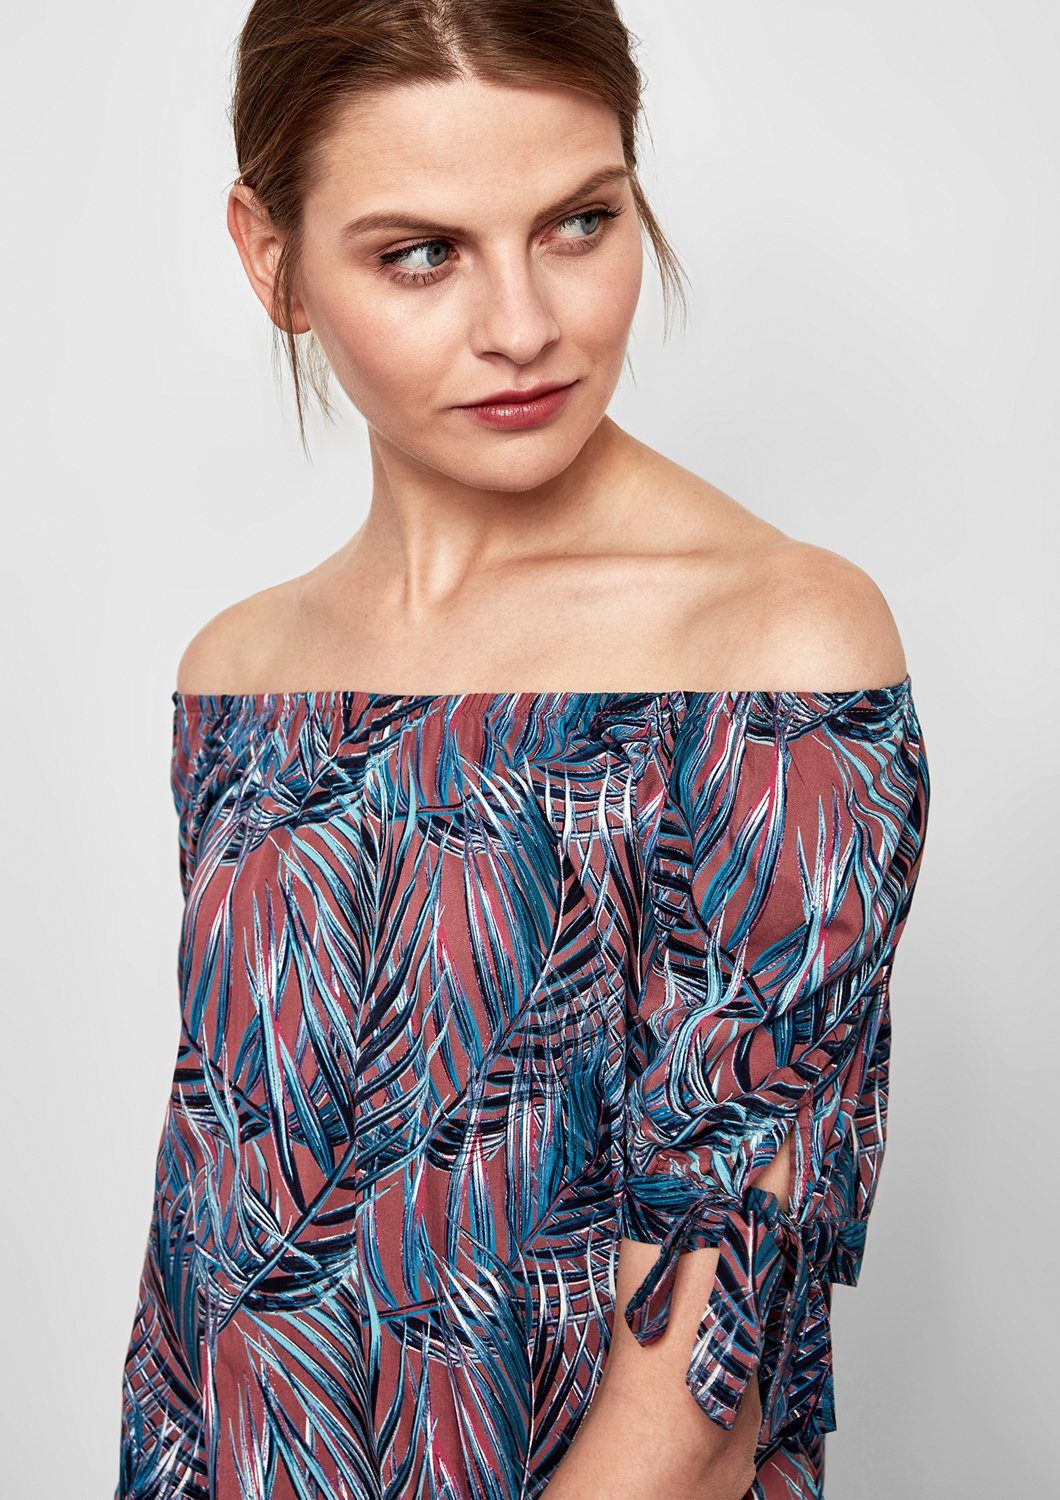 Otto - Q/s Designed By NU 15% KORTING: Q/S designed by Off-shoulder blouse met motiefprint